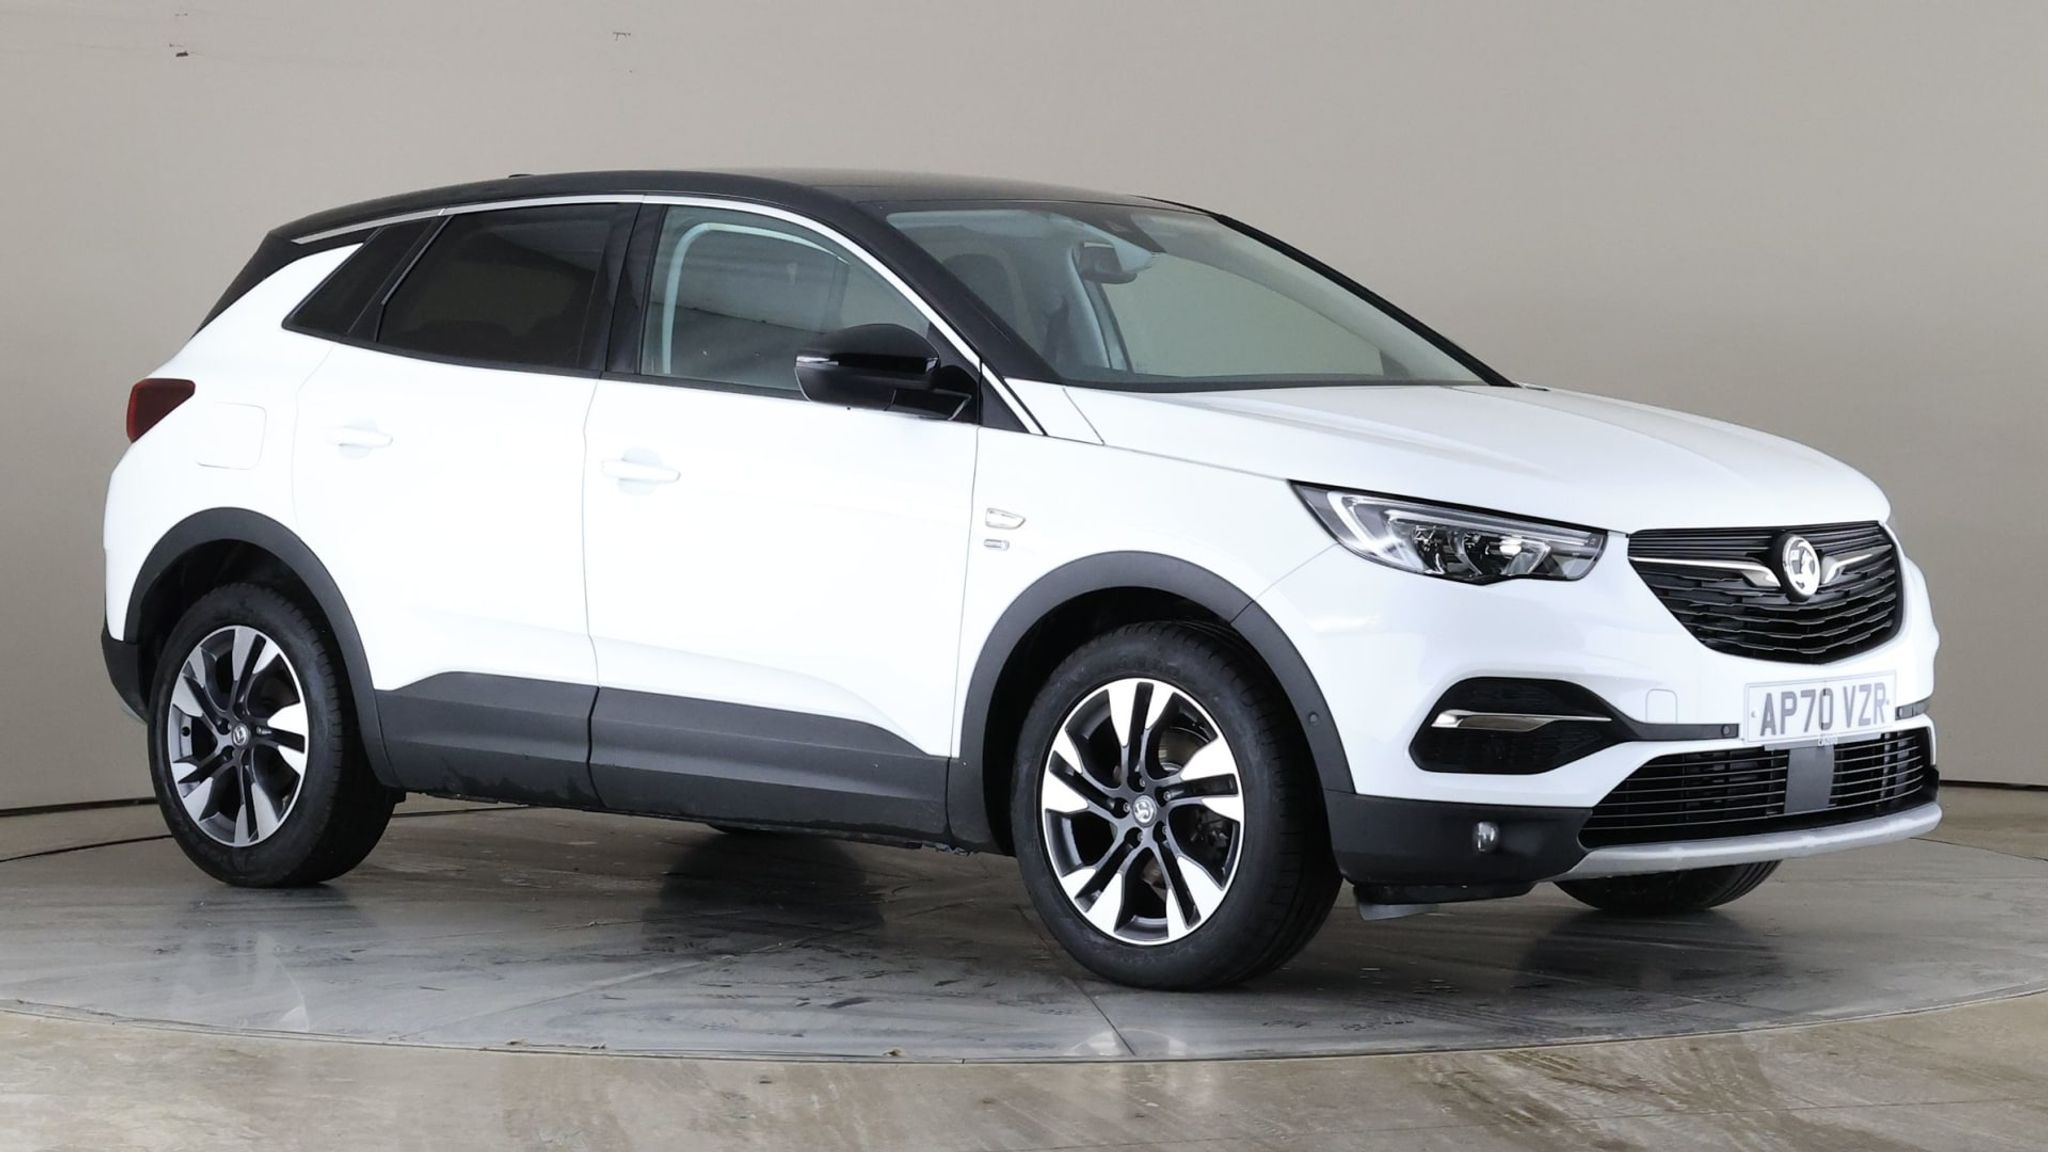 2020 used Vauxhall Grandland X 1.5 Turbo D Griffin (130 ps)